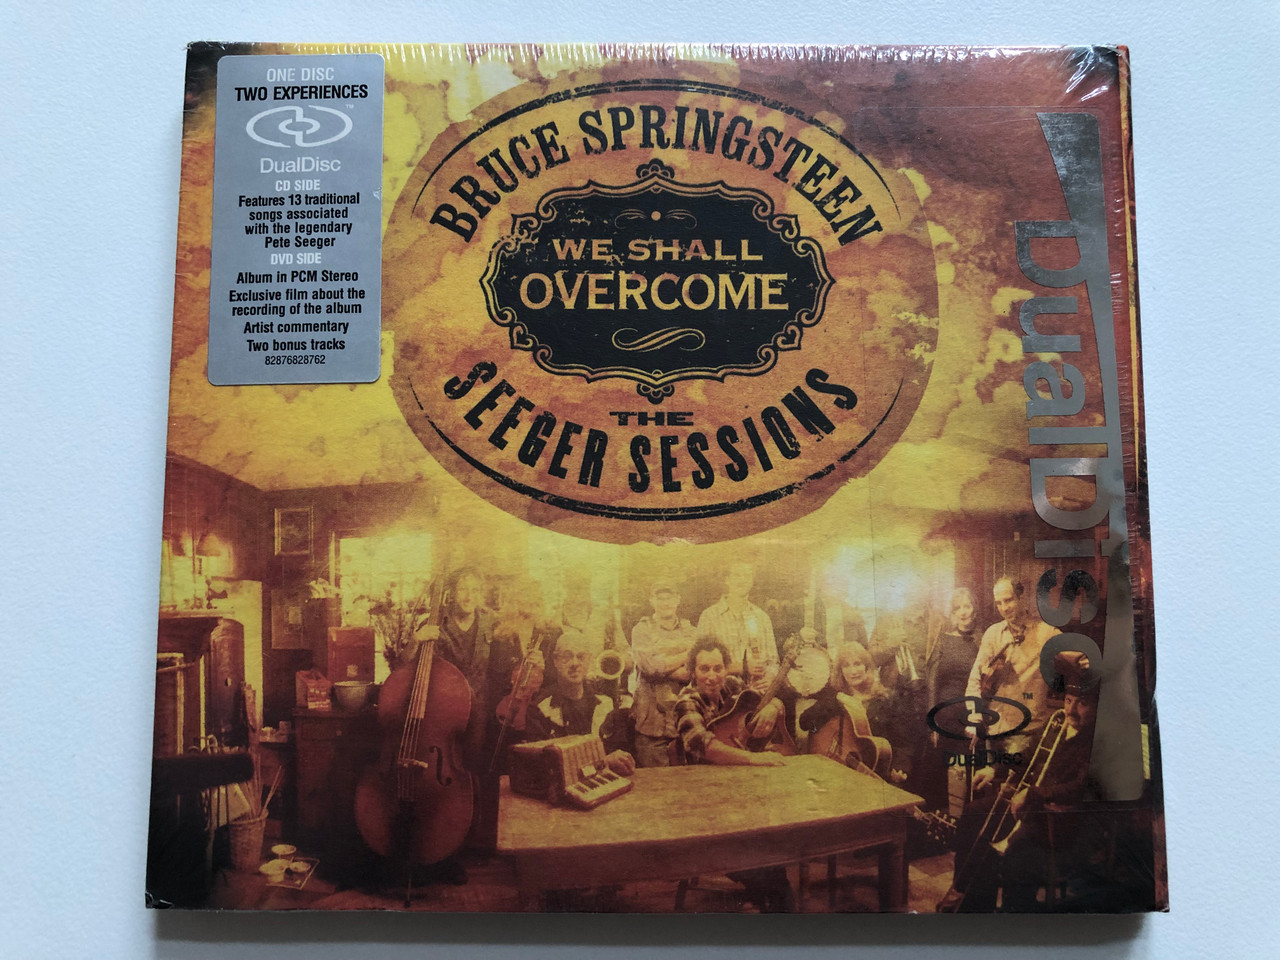 Bruce Springsteen – We Shall Overcome - The Seeger Sessions / Dual Disc /  Columbia Audio CD + DVD Side 2006 / 82876828762 - bibleinmylanguage